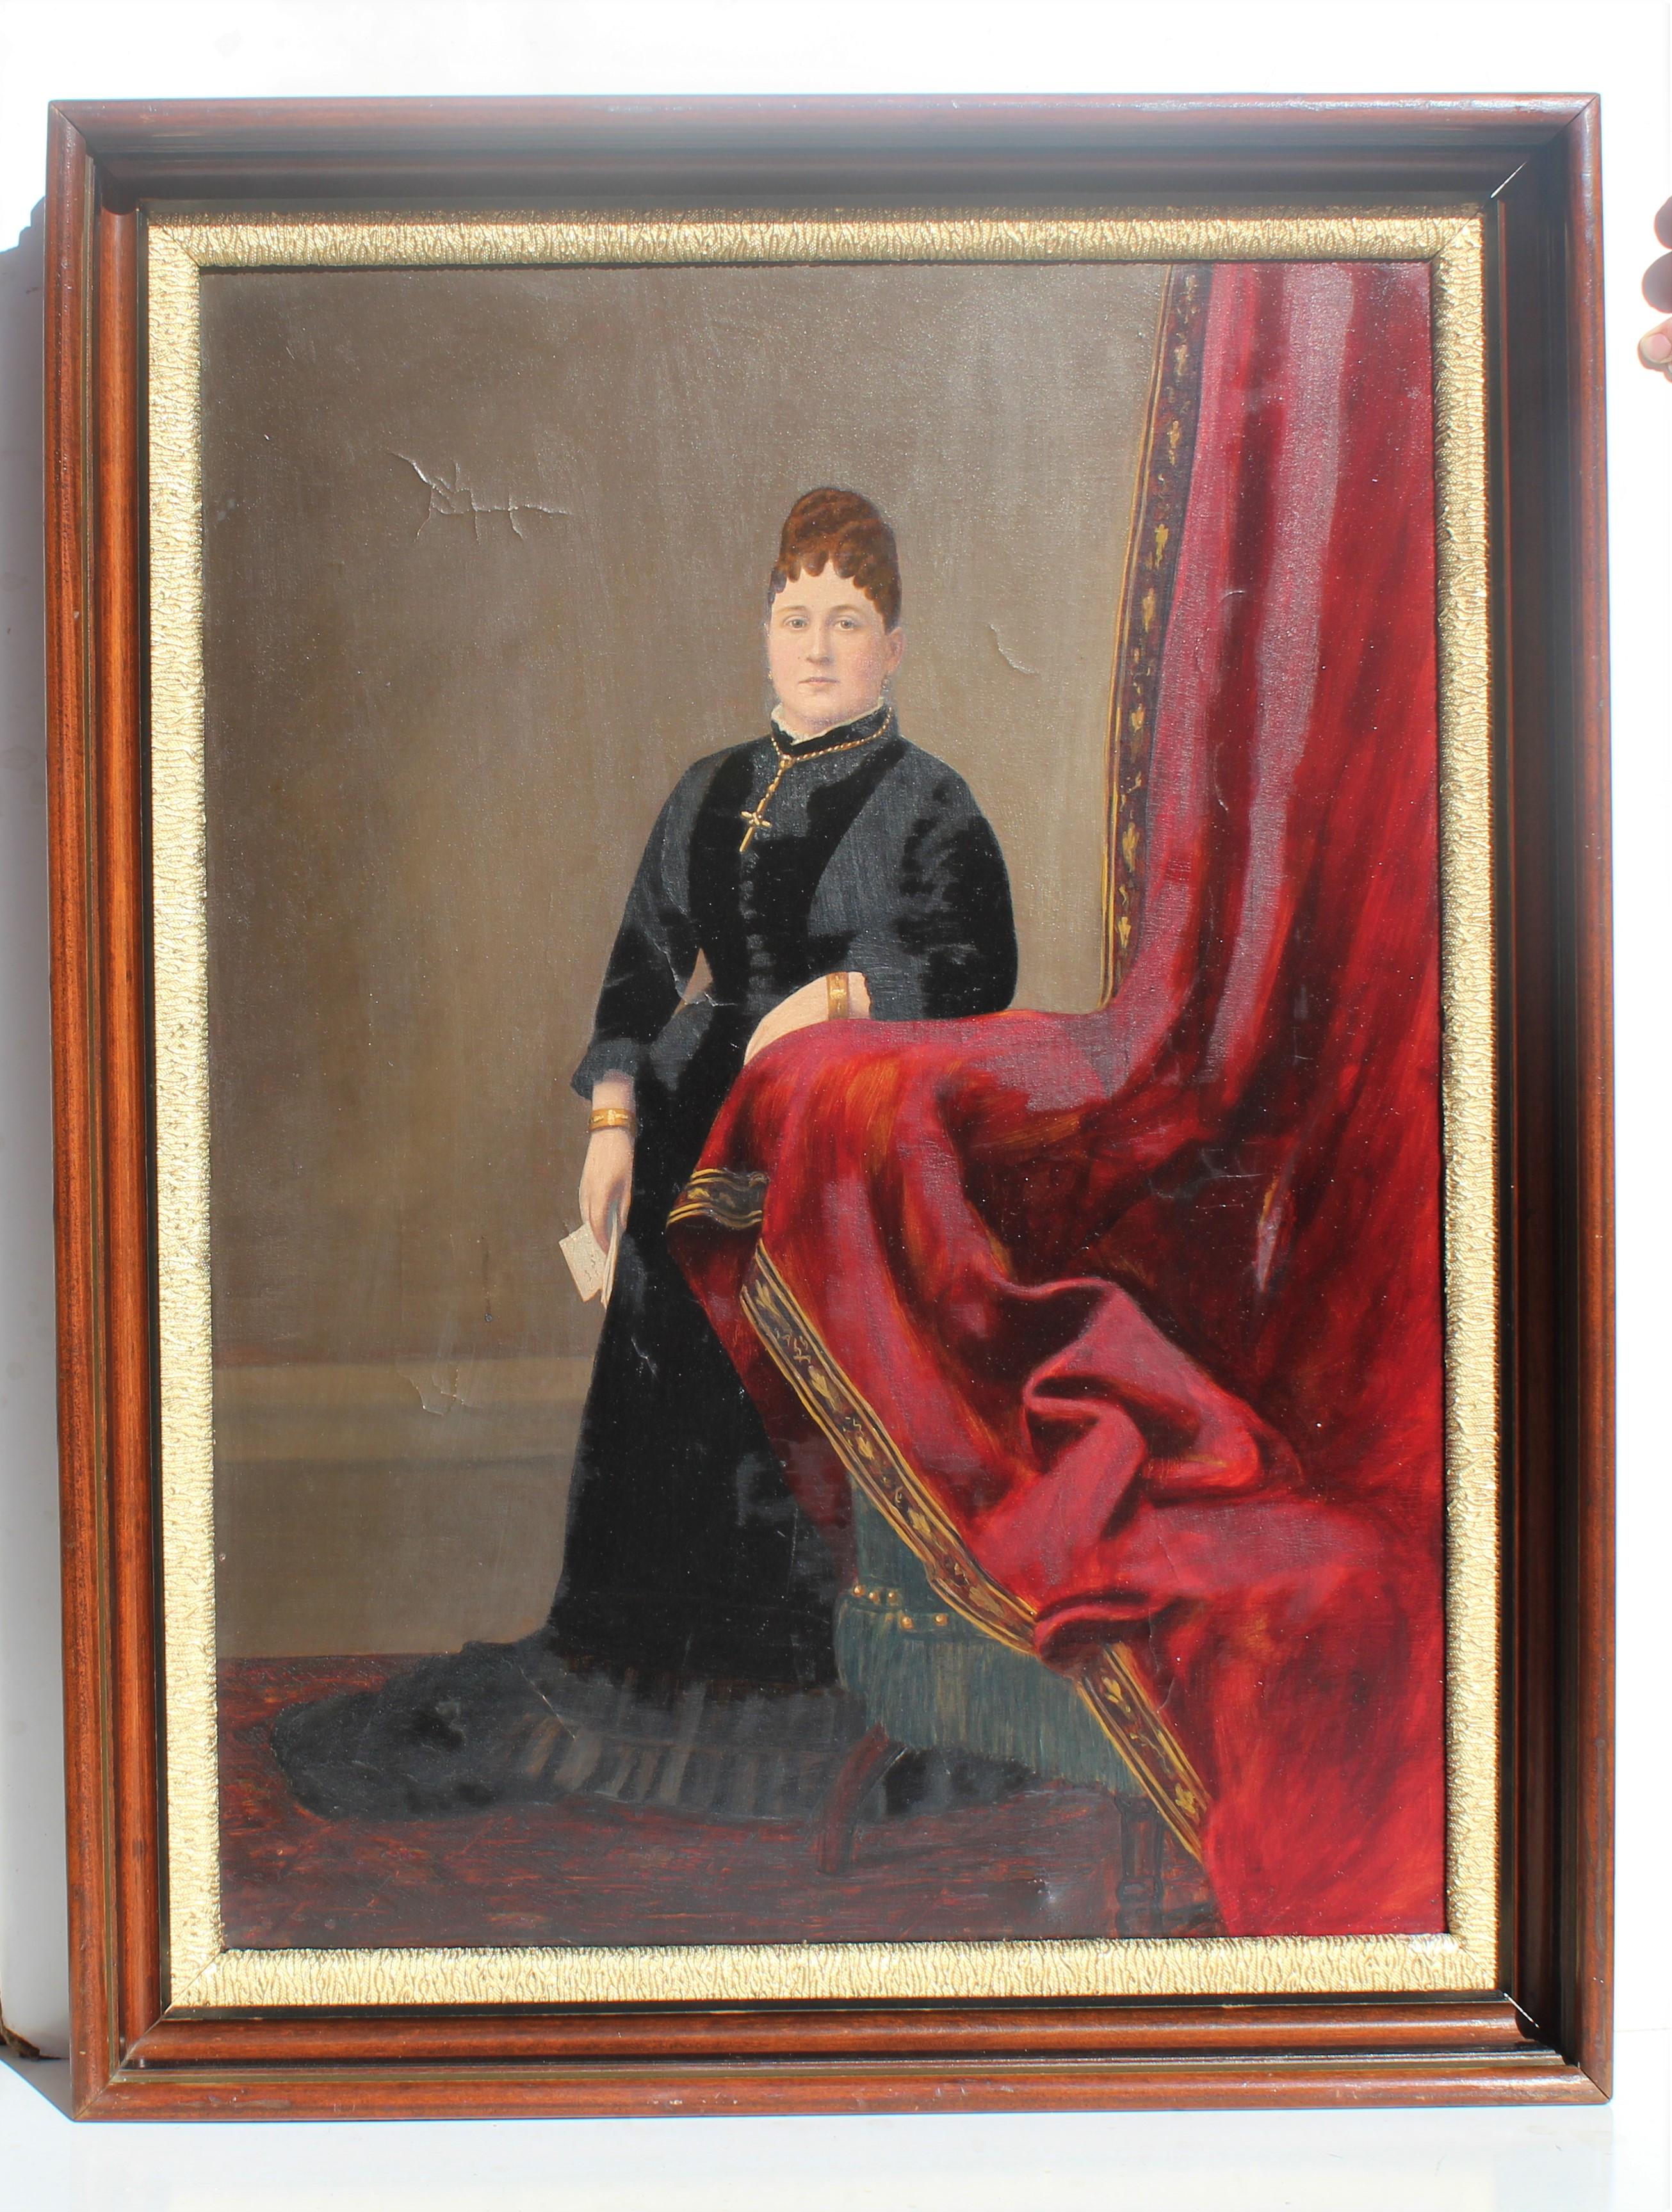 This is an original antique 19th-century large oil painting on canvas painting depicting a portrait of a Lady in a long black dress, standing near a bright red curtain.

The painting overall is in good antique condition, has some craquelures due to